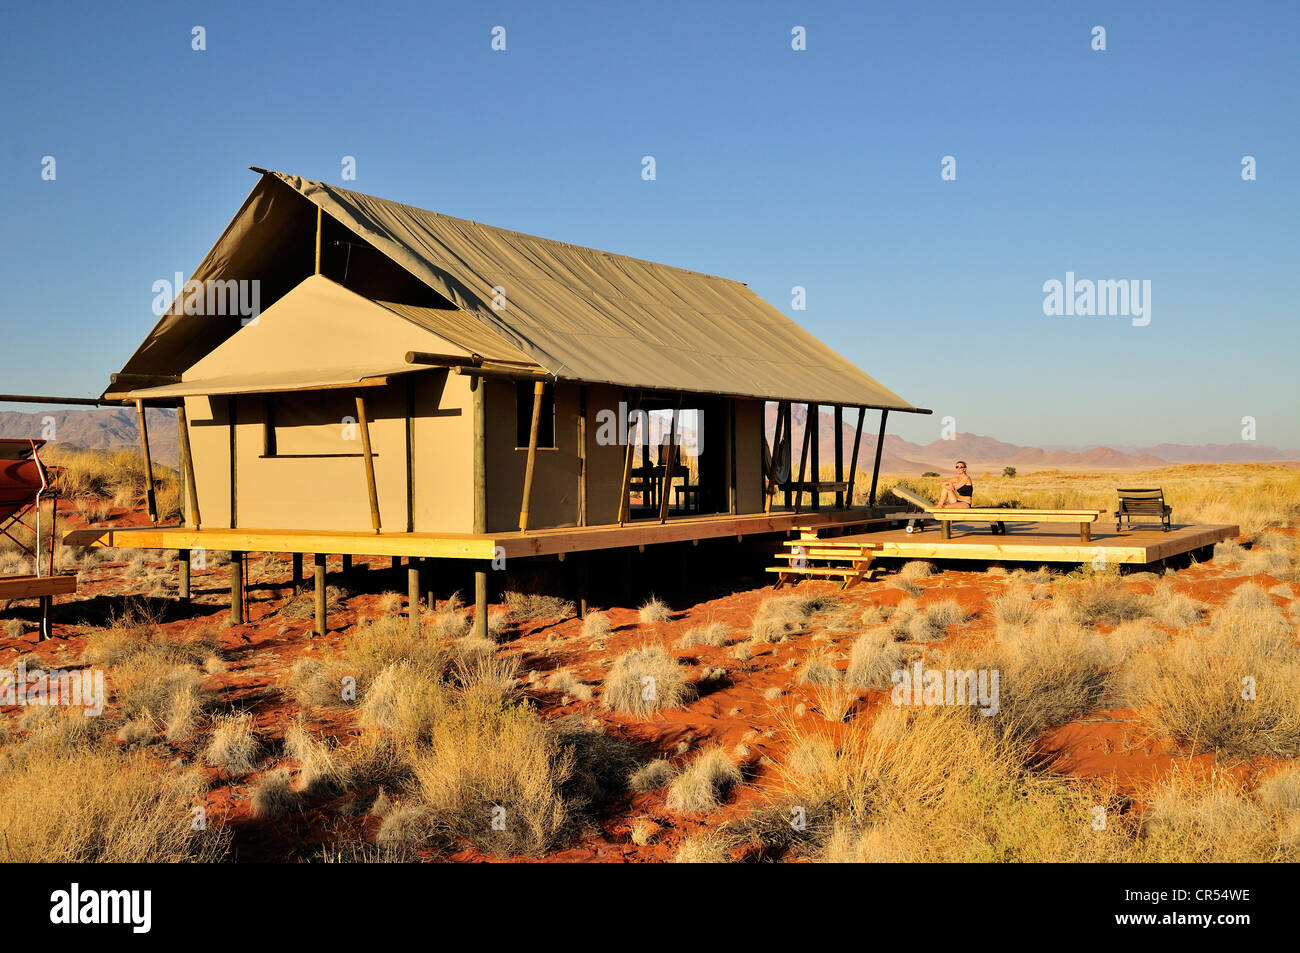 Chalet of the Wolwedans Dune Lodge in the Namib Rand Nature Reserve, Namib Desert, Namibia, Africa Stock Photo